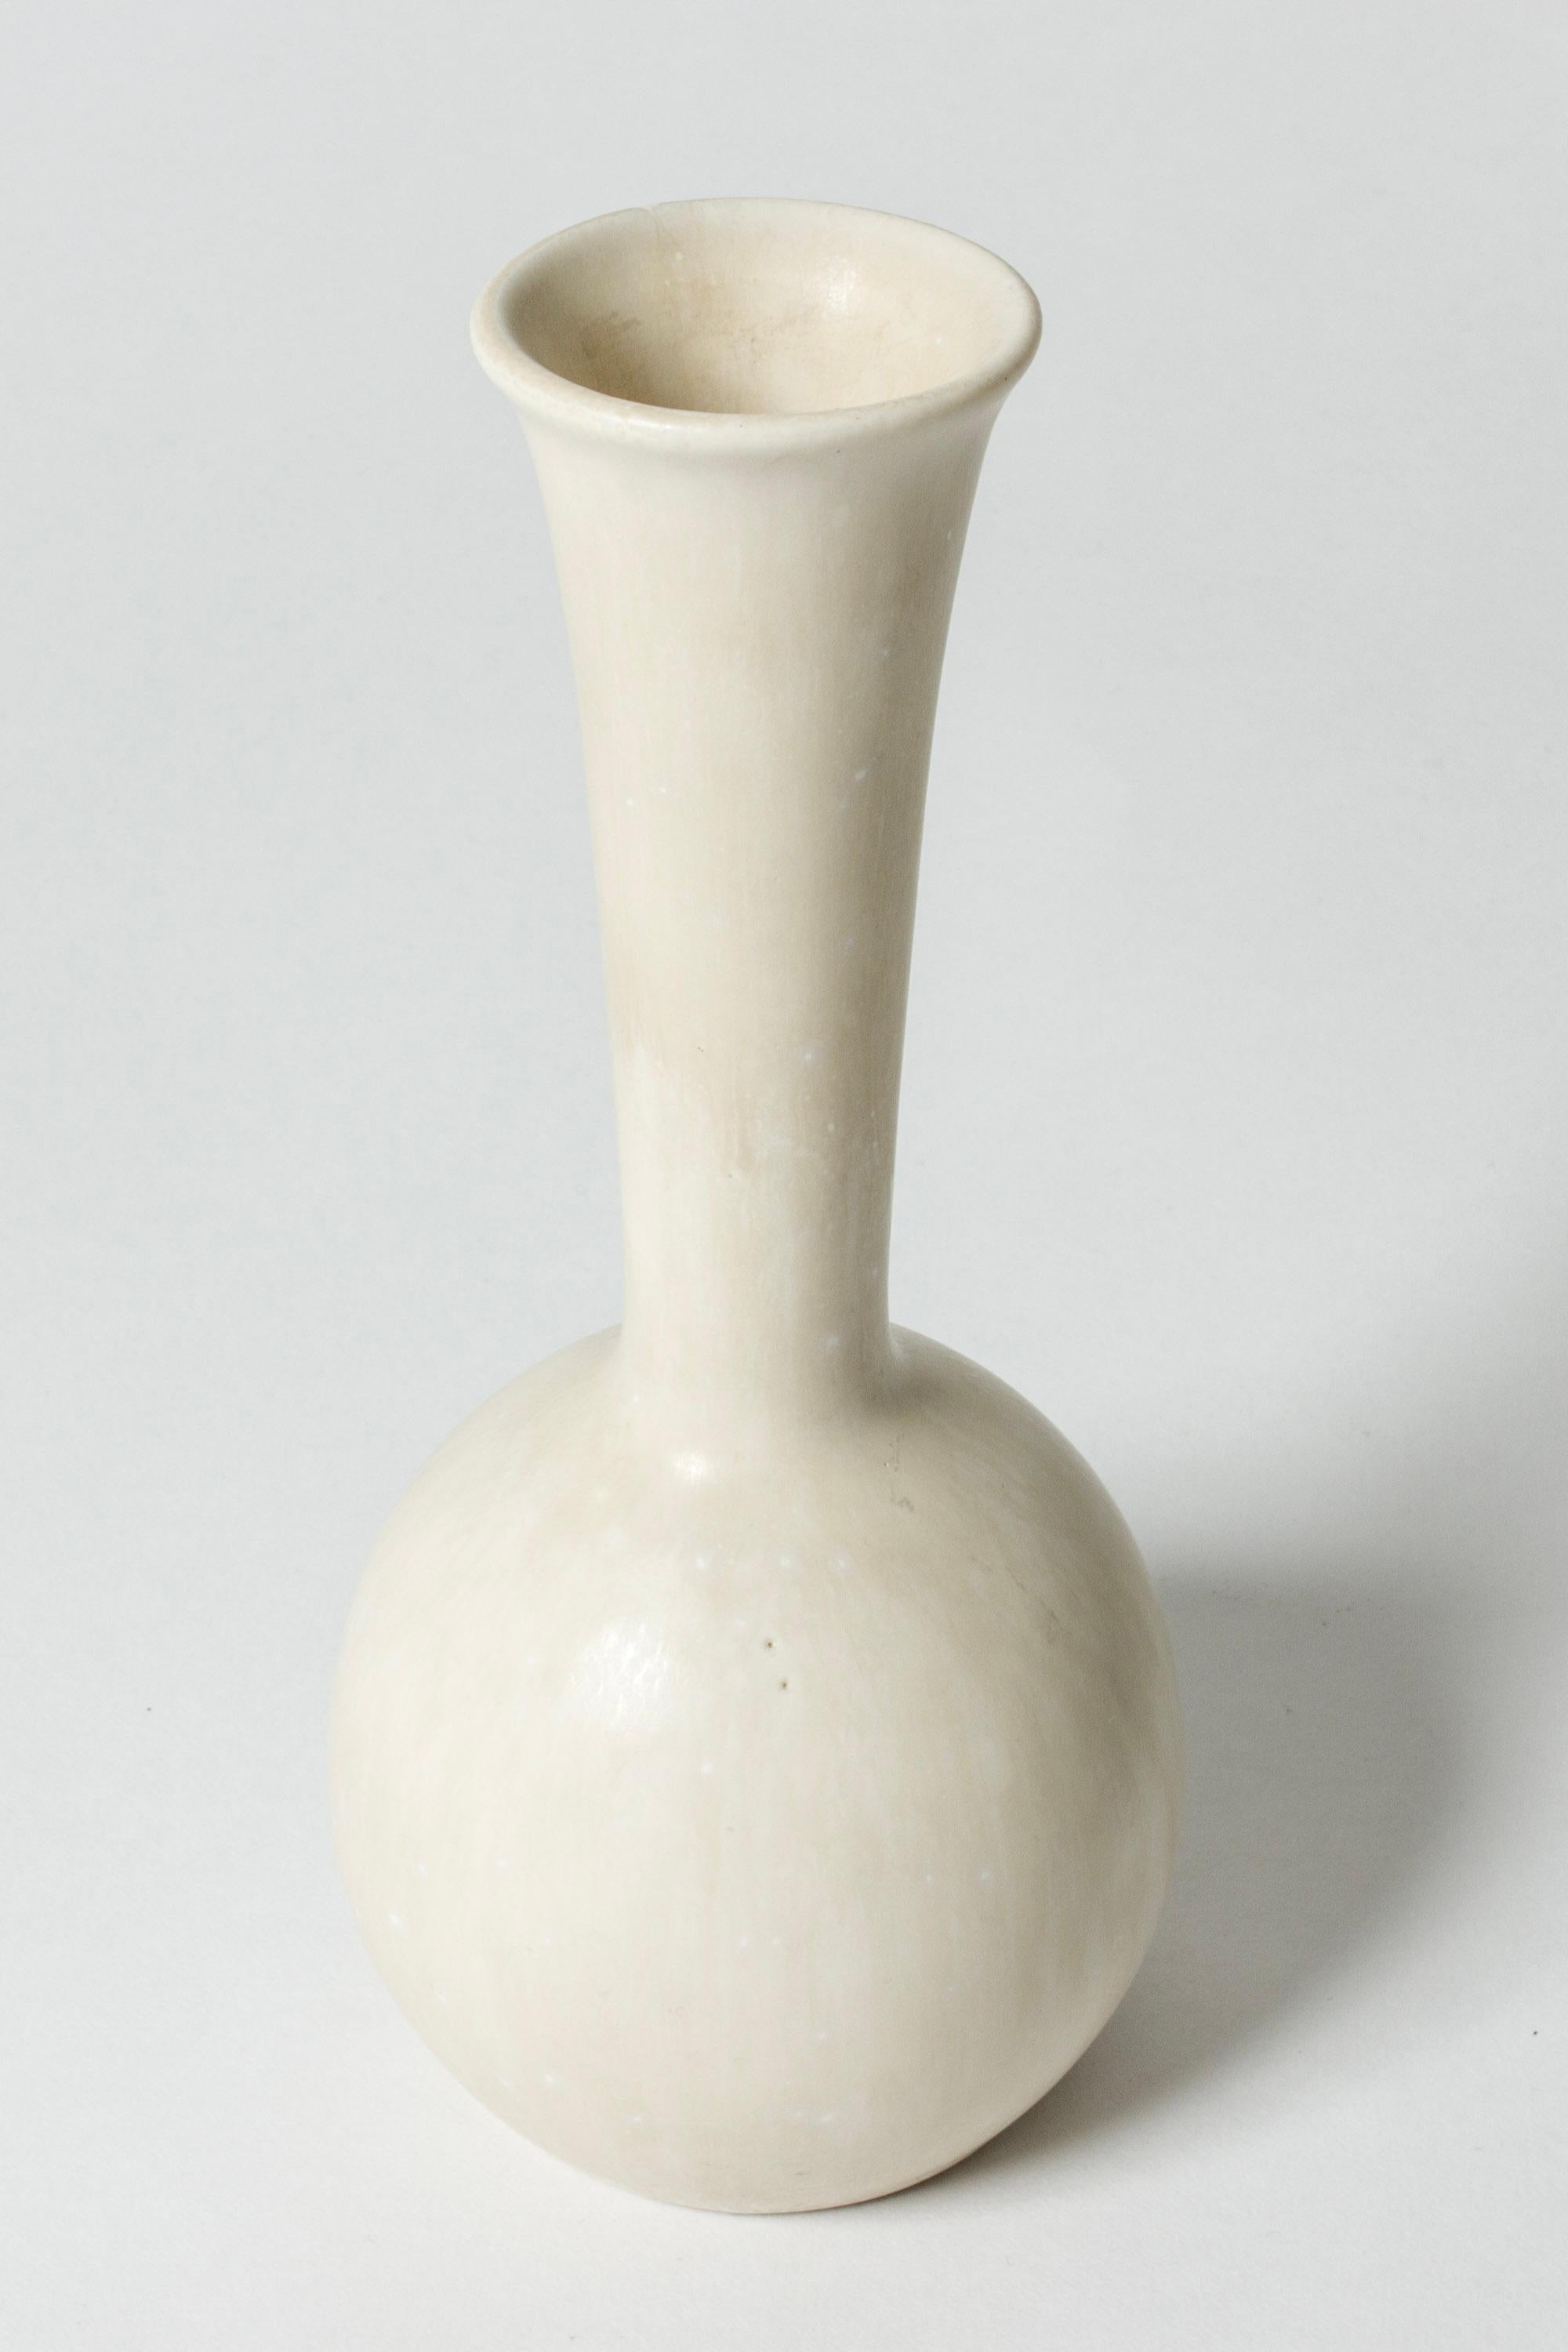 Lovely stoneware vase by Gunnar Nylund, in an onion form. Glazed eggshell white.

Gunnar Nylund was one of the most influential ceramicists and designers of the Swedish mid-century period. He was Rörstrand’s creative leader from 1931 until 1949